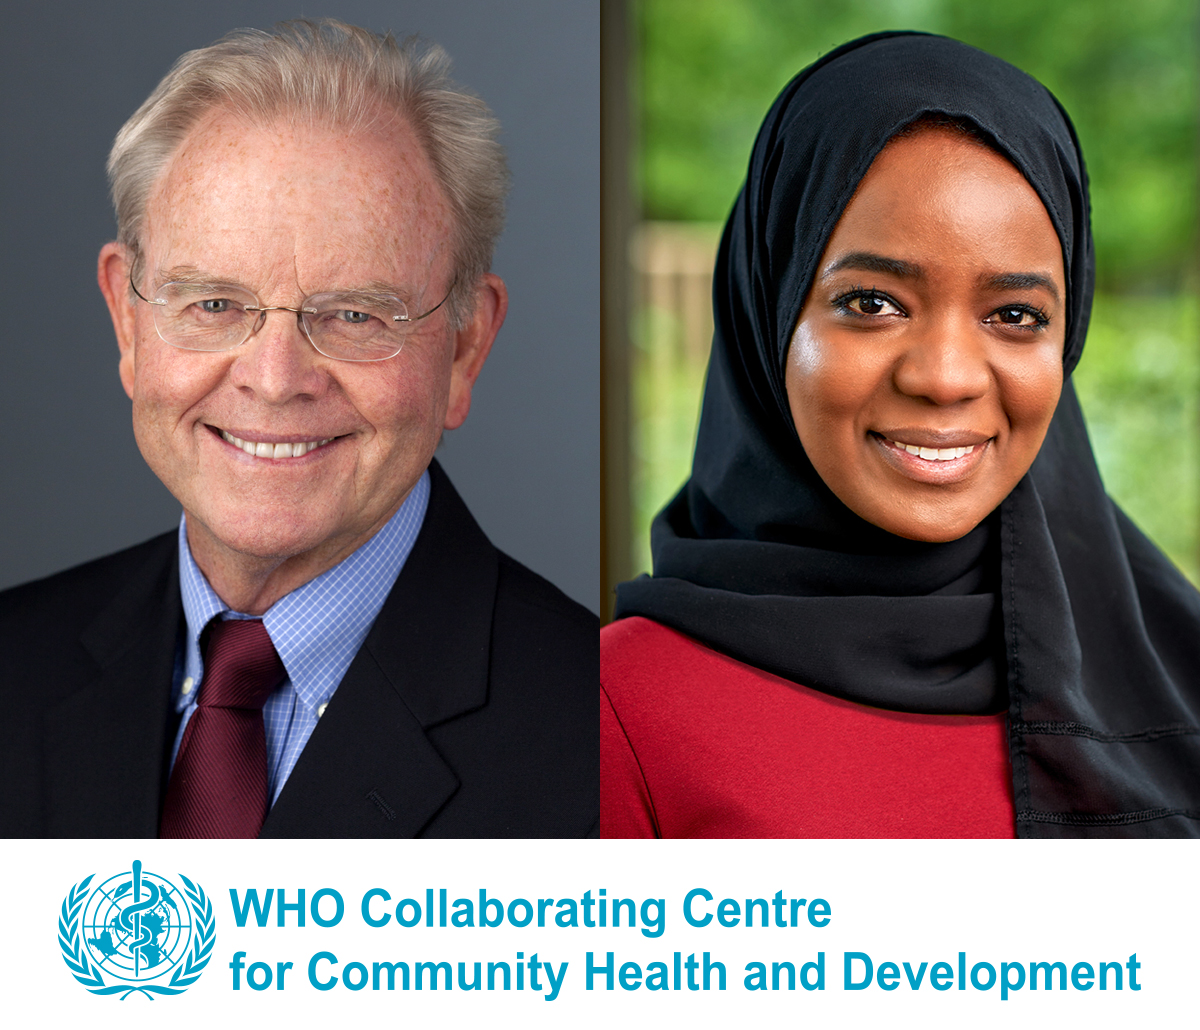 Stephen Fawcett and Ruaa Hassaballa with the WHO Collaborating Centre for Community Health and Development logo.